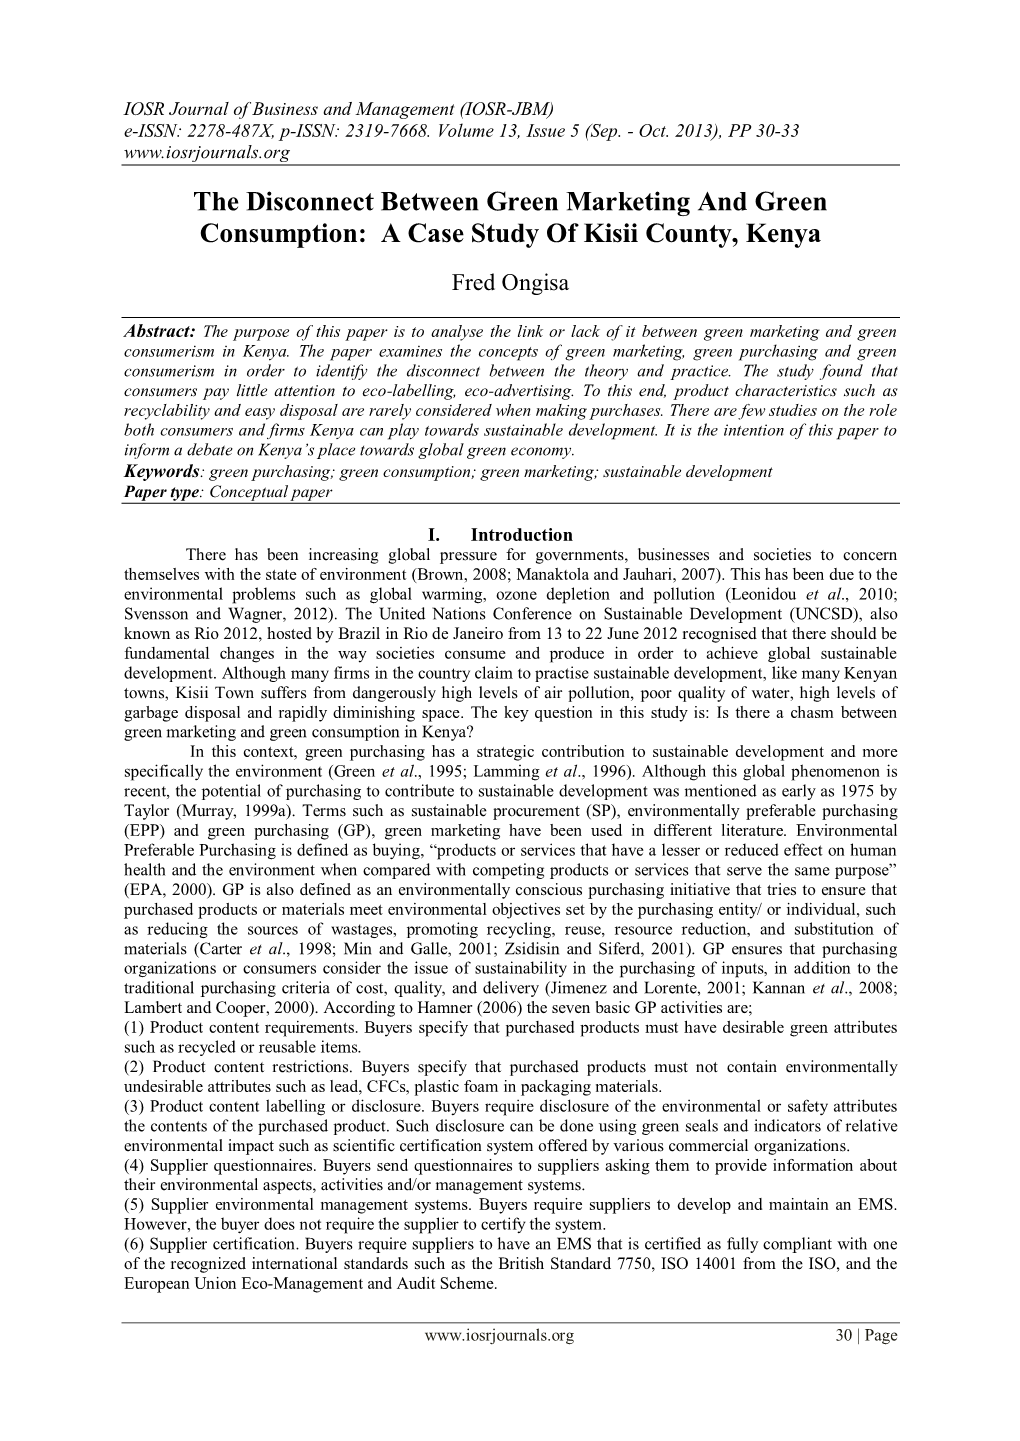 The Disconnect Between Green Marketing and Green Consumption: a Case Study of Kisii County, Kenya